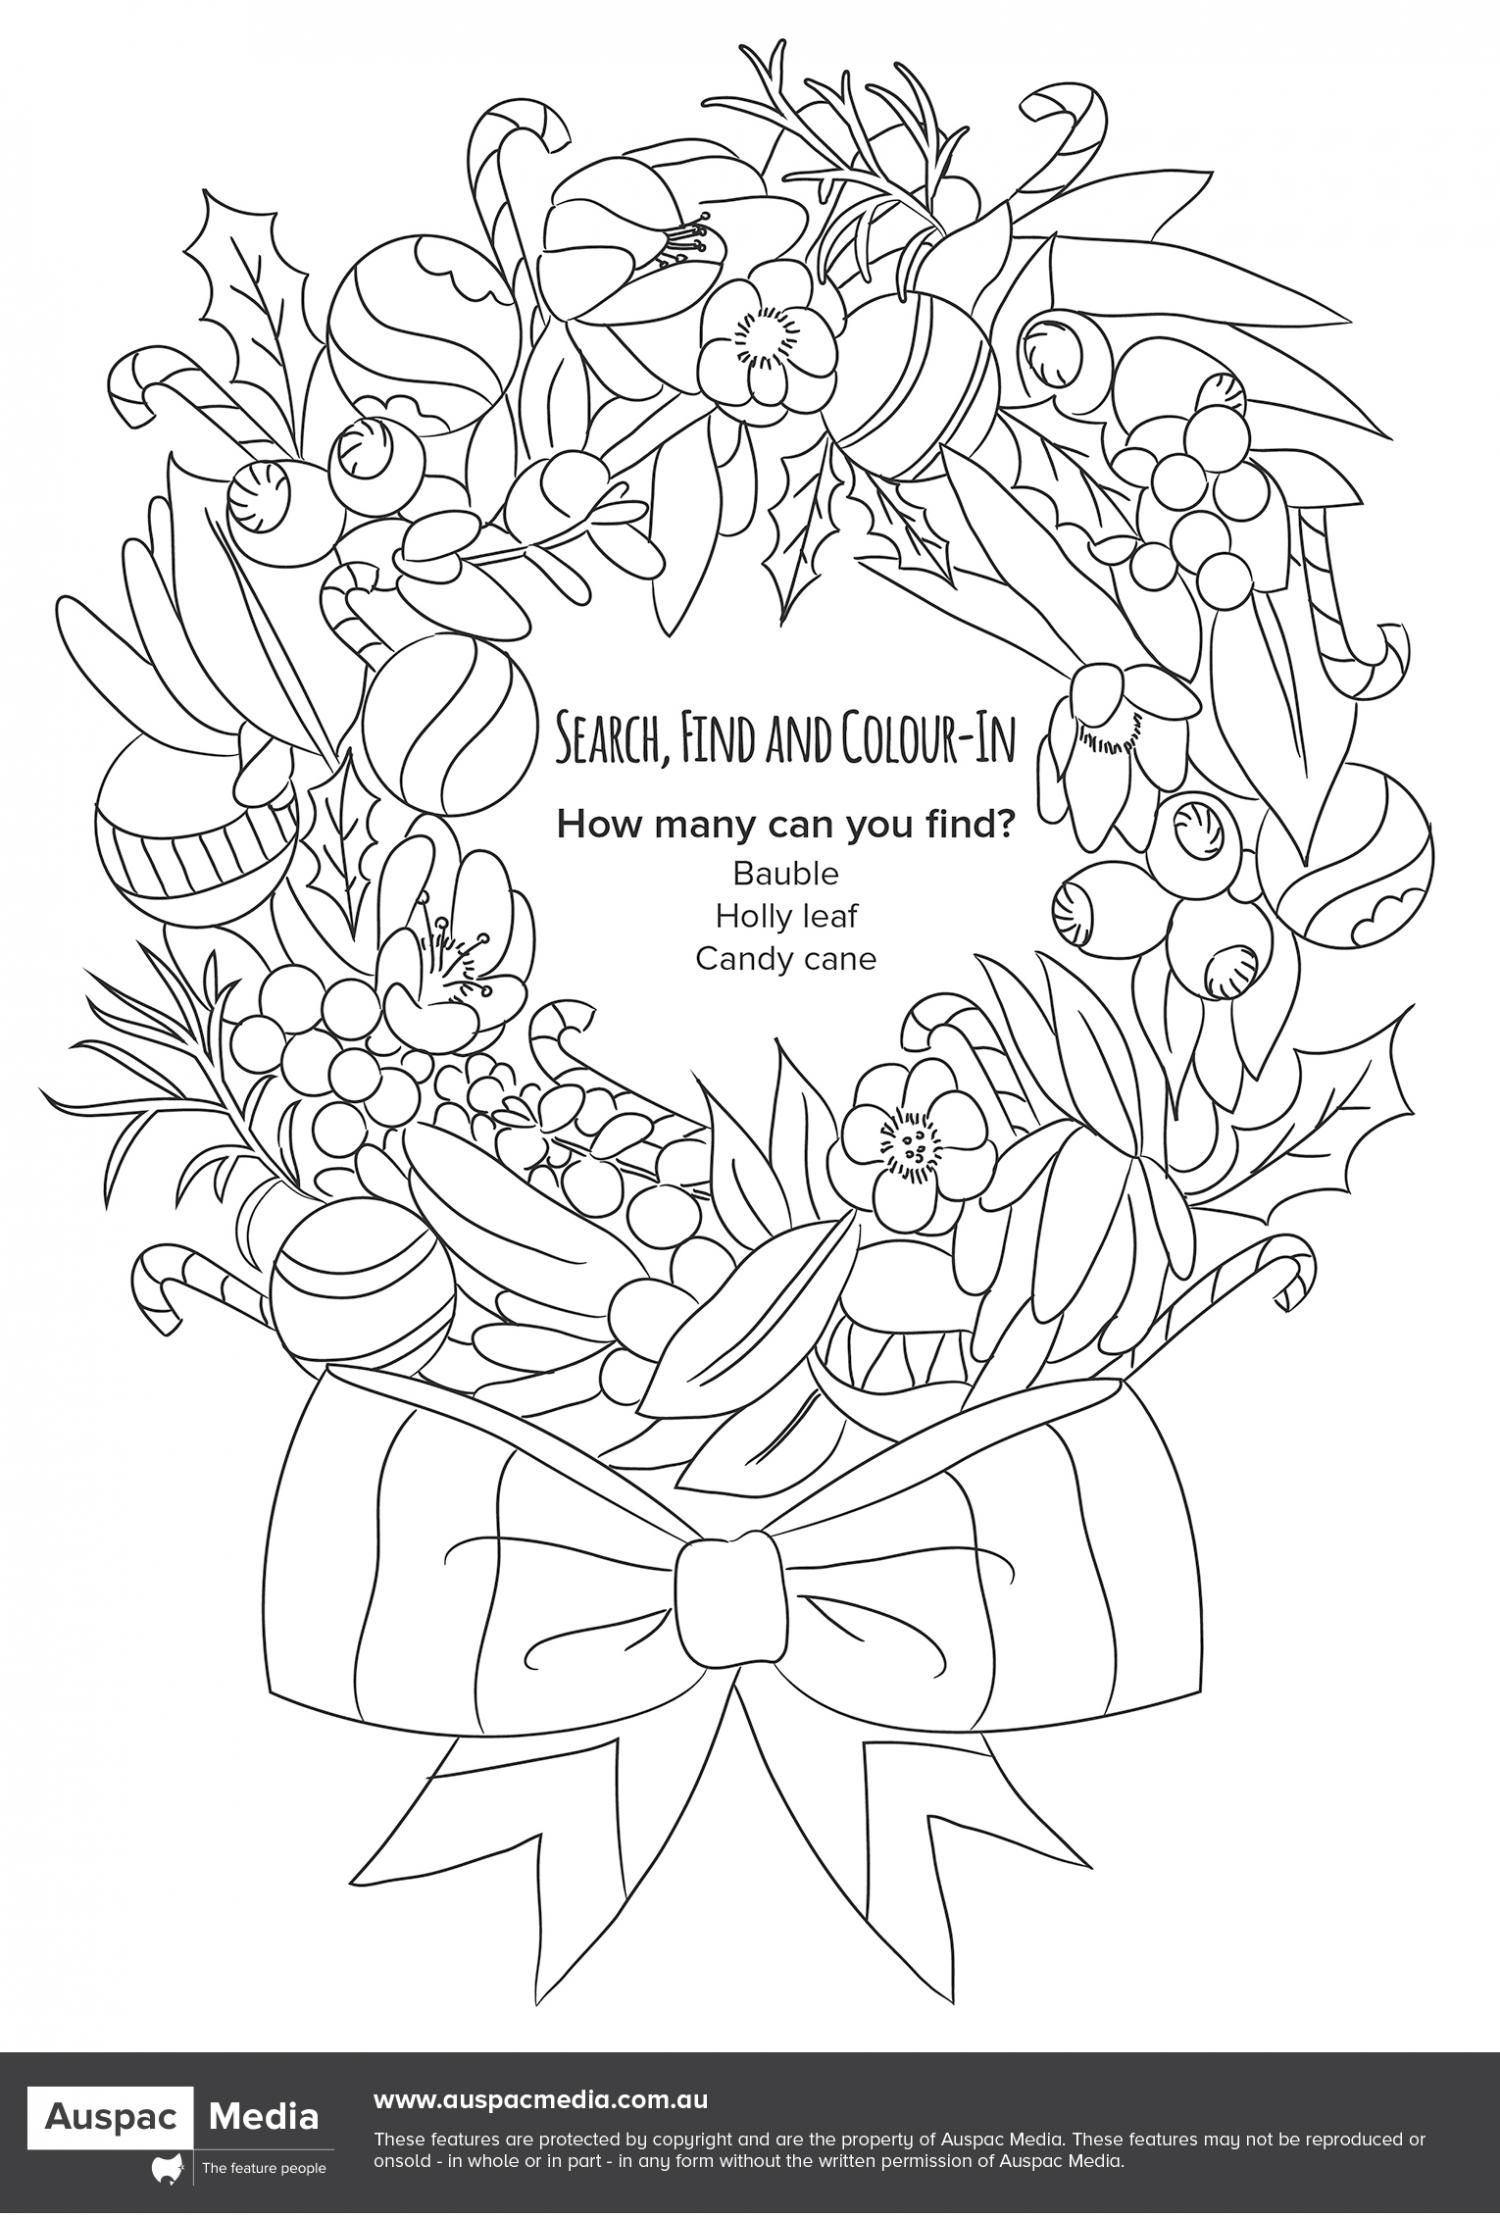 Thumbnail for Search, Find and Colour-In - Christmas